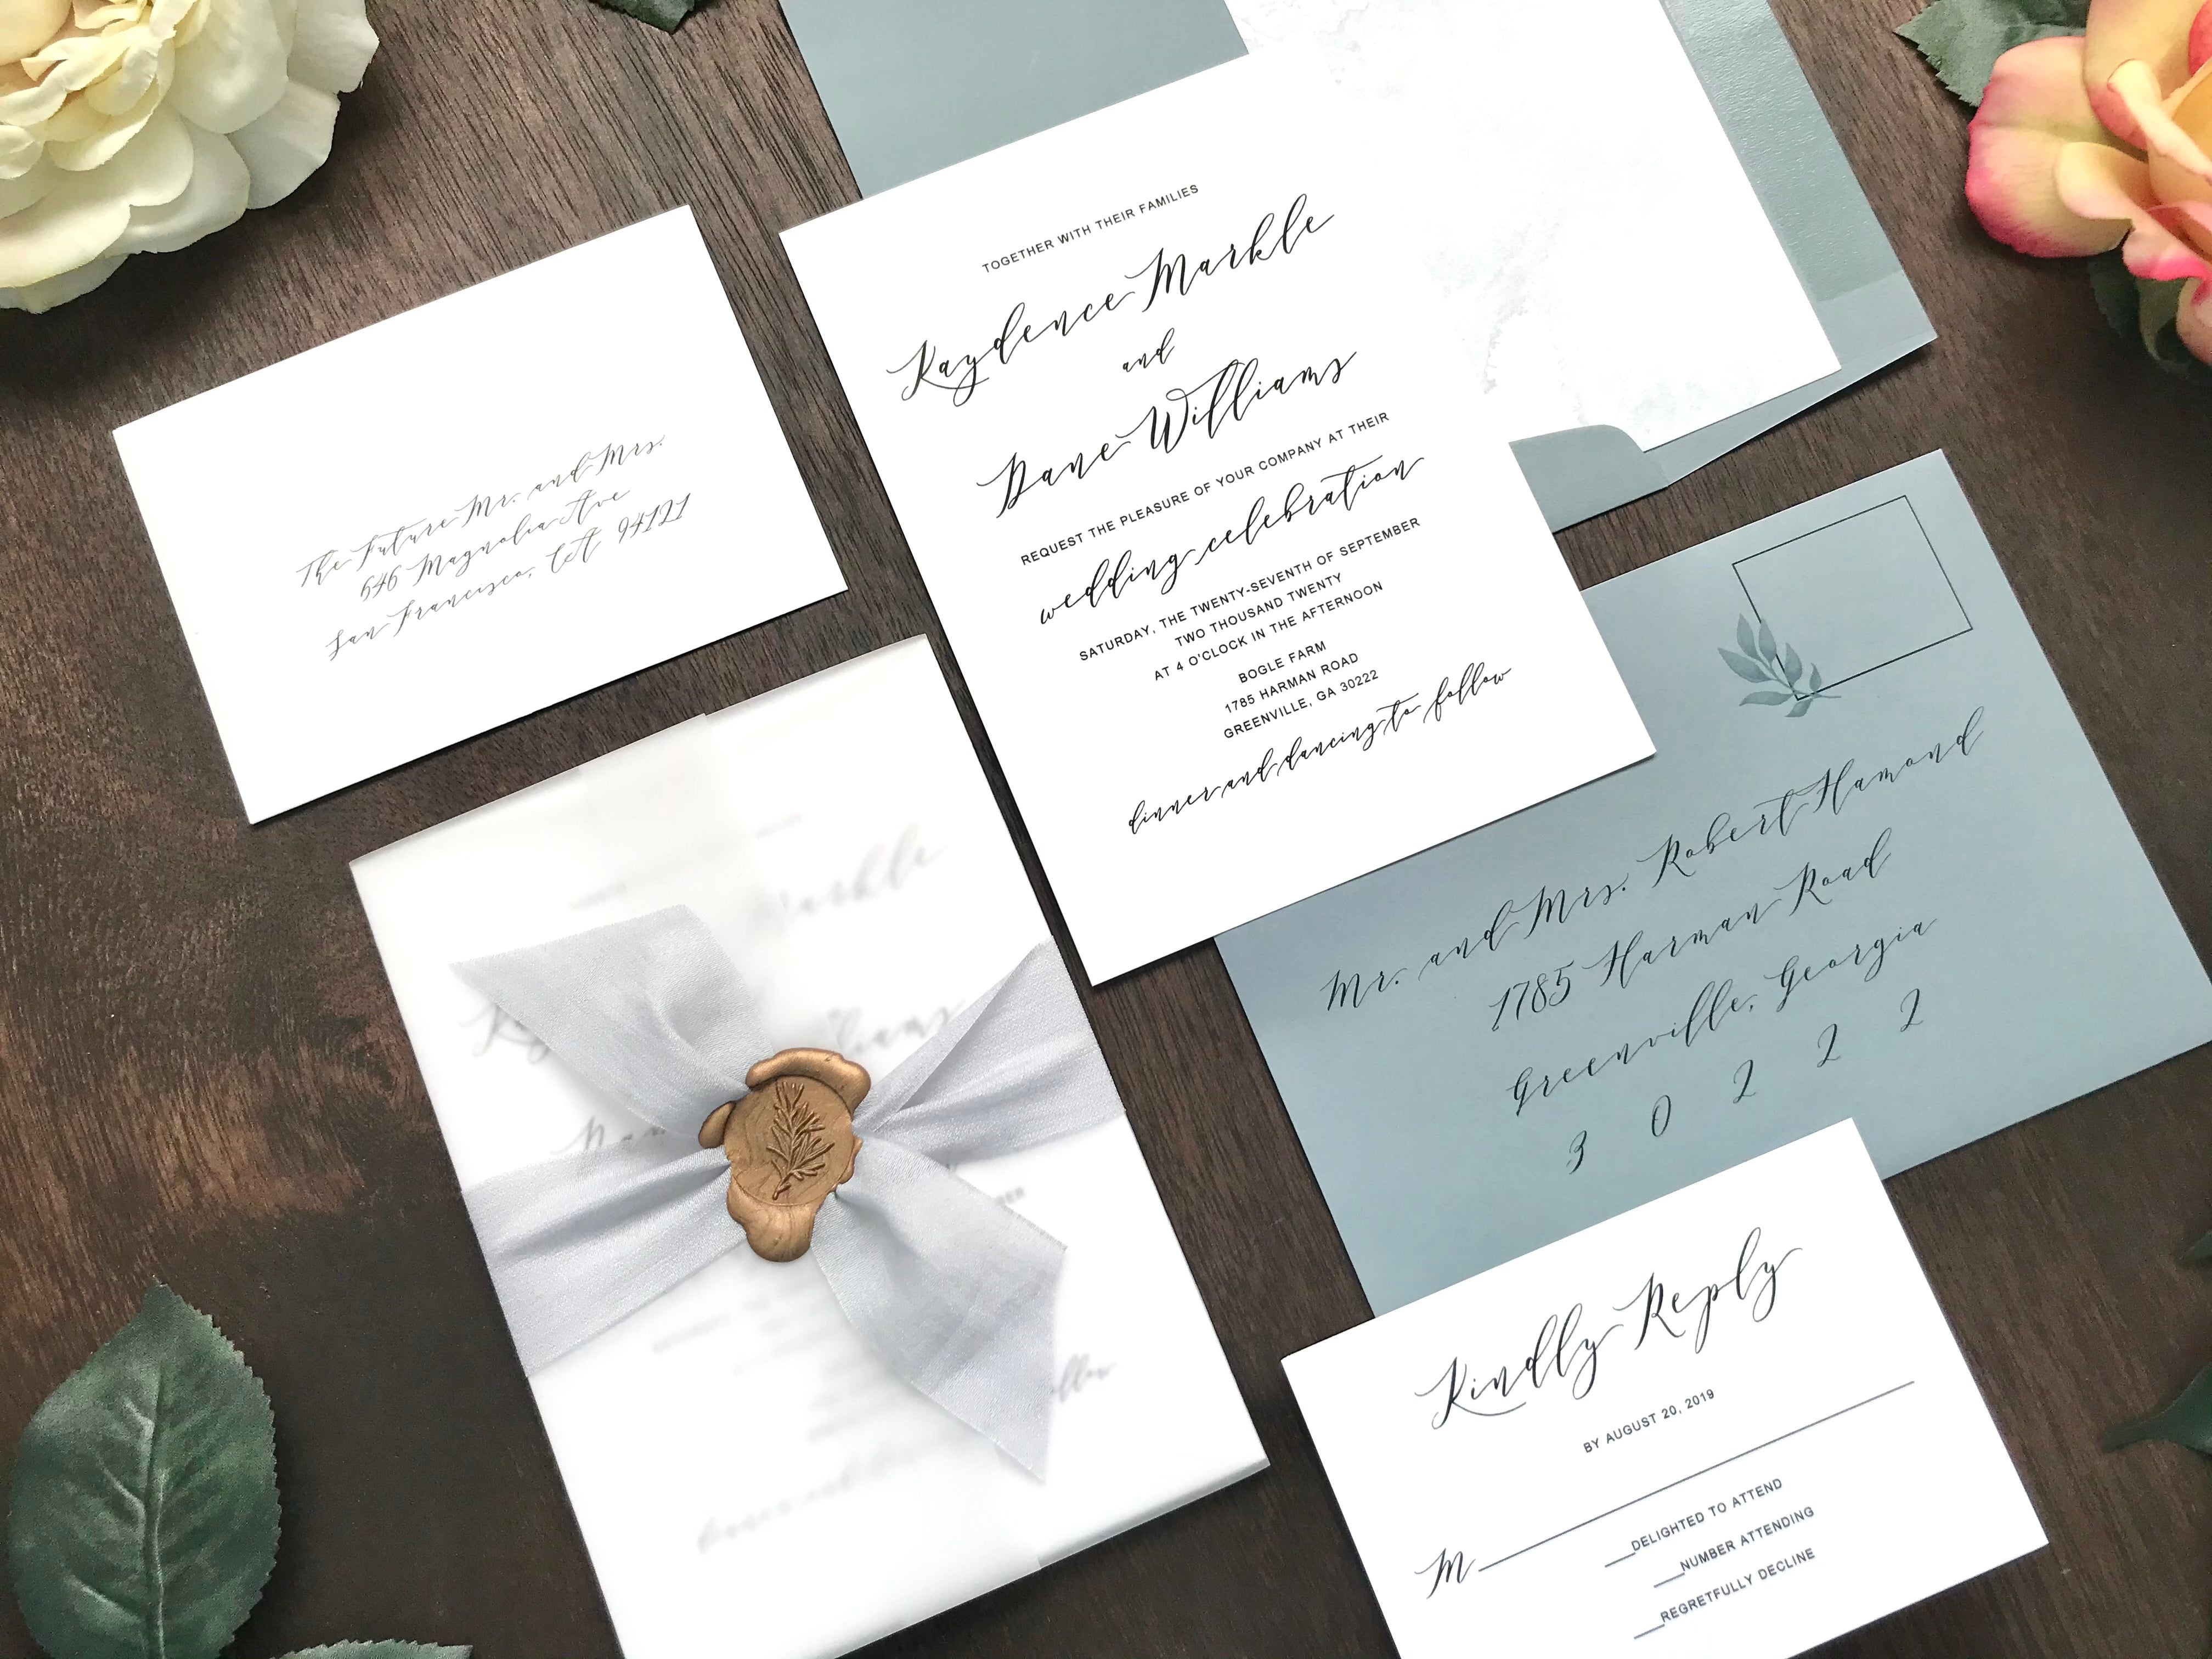 Dusty Blue Wedding Invitation with Vellum, Ribbon and Wax Seal